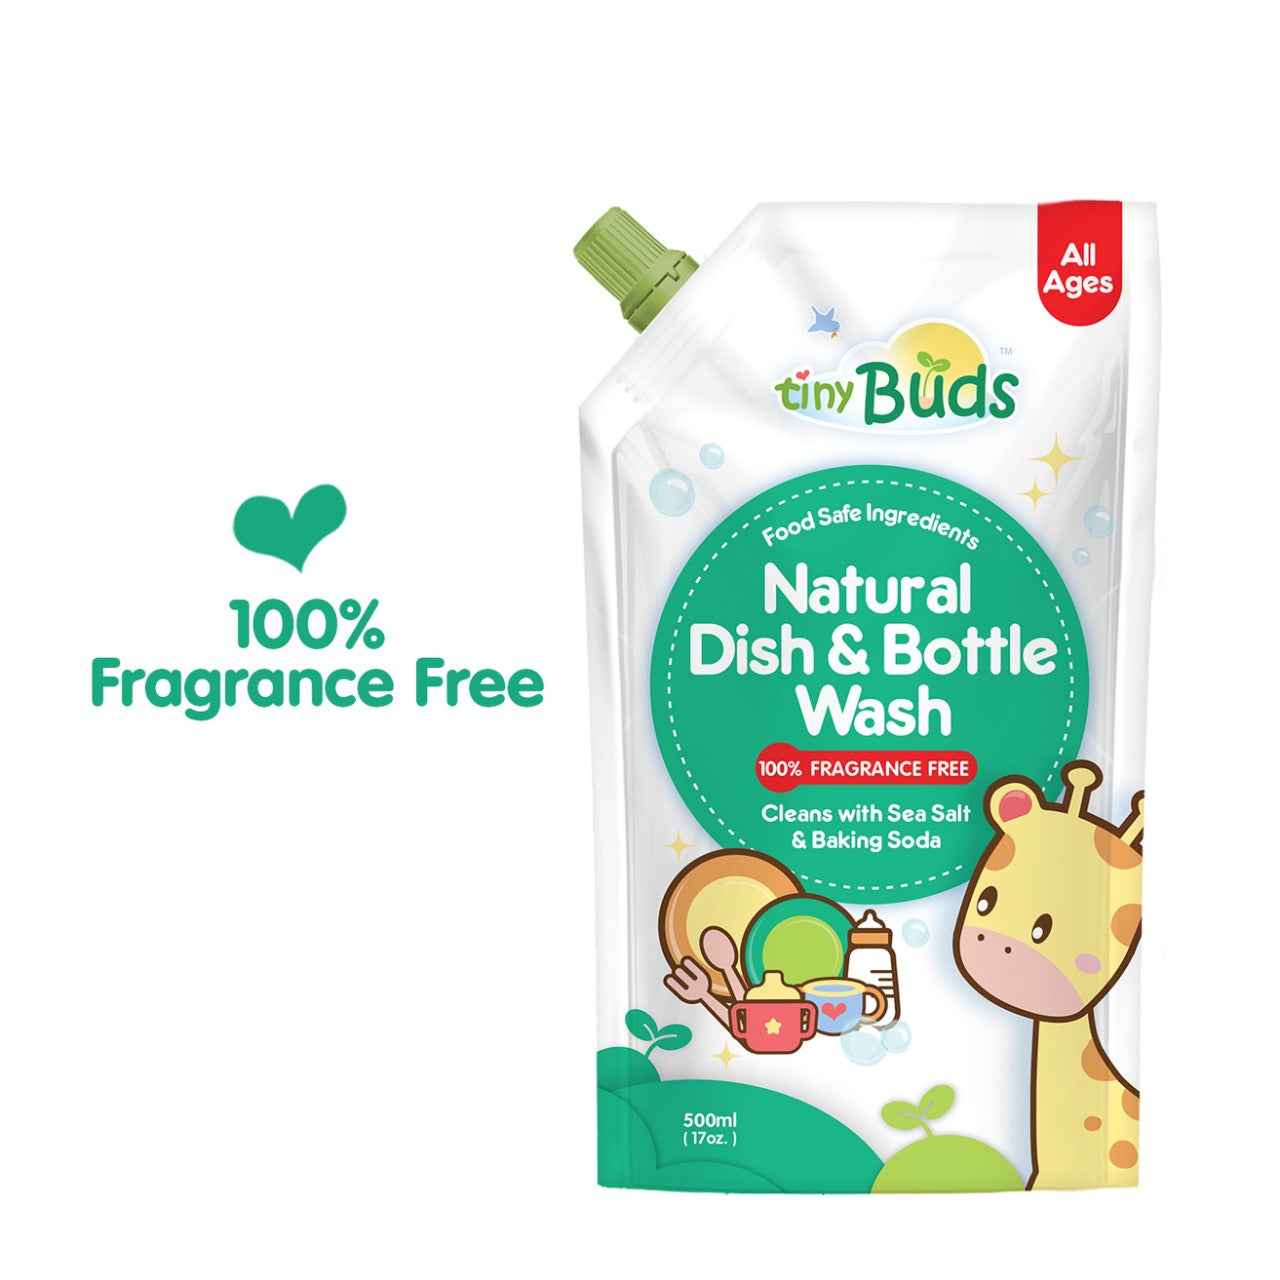 Tiny Buds Natural Dish & Bottle Wash Fragrance Free Refill (500ml)